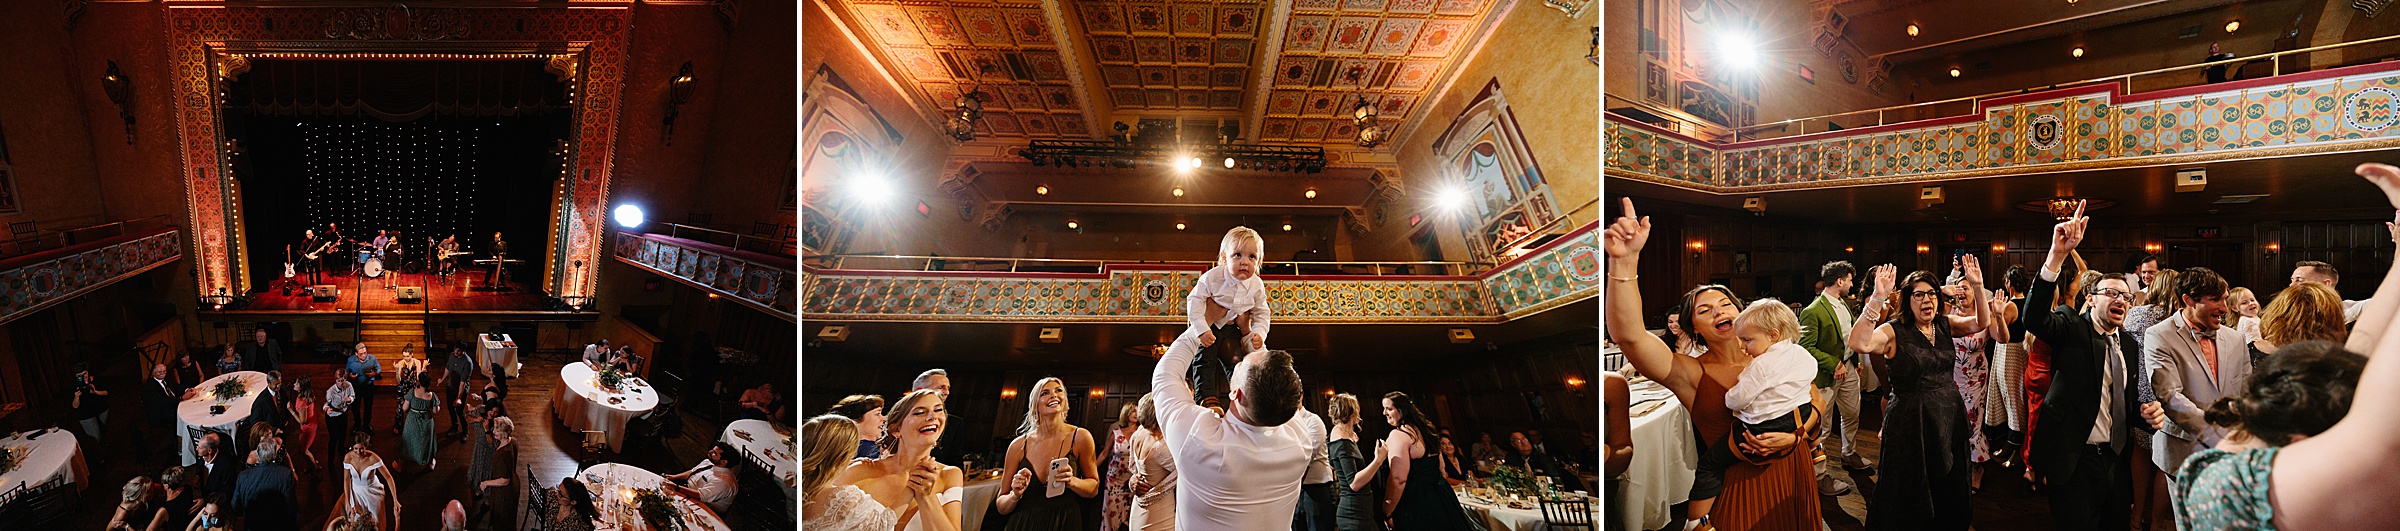 Faraway shot of a band playing during the wedding reception; child is lifted up on the dance floor; guests dance together at the Gem Theater Wedding by Detroit Wedding Photographer Michele Maloney